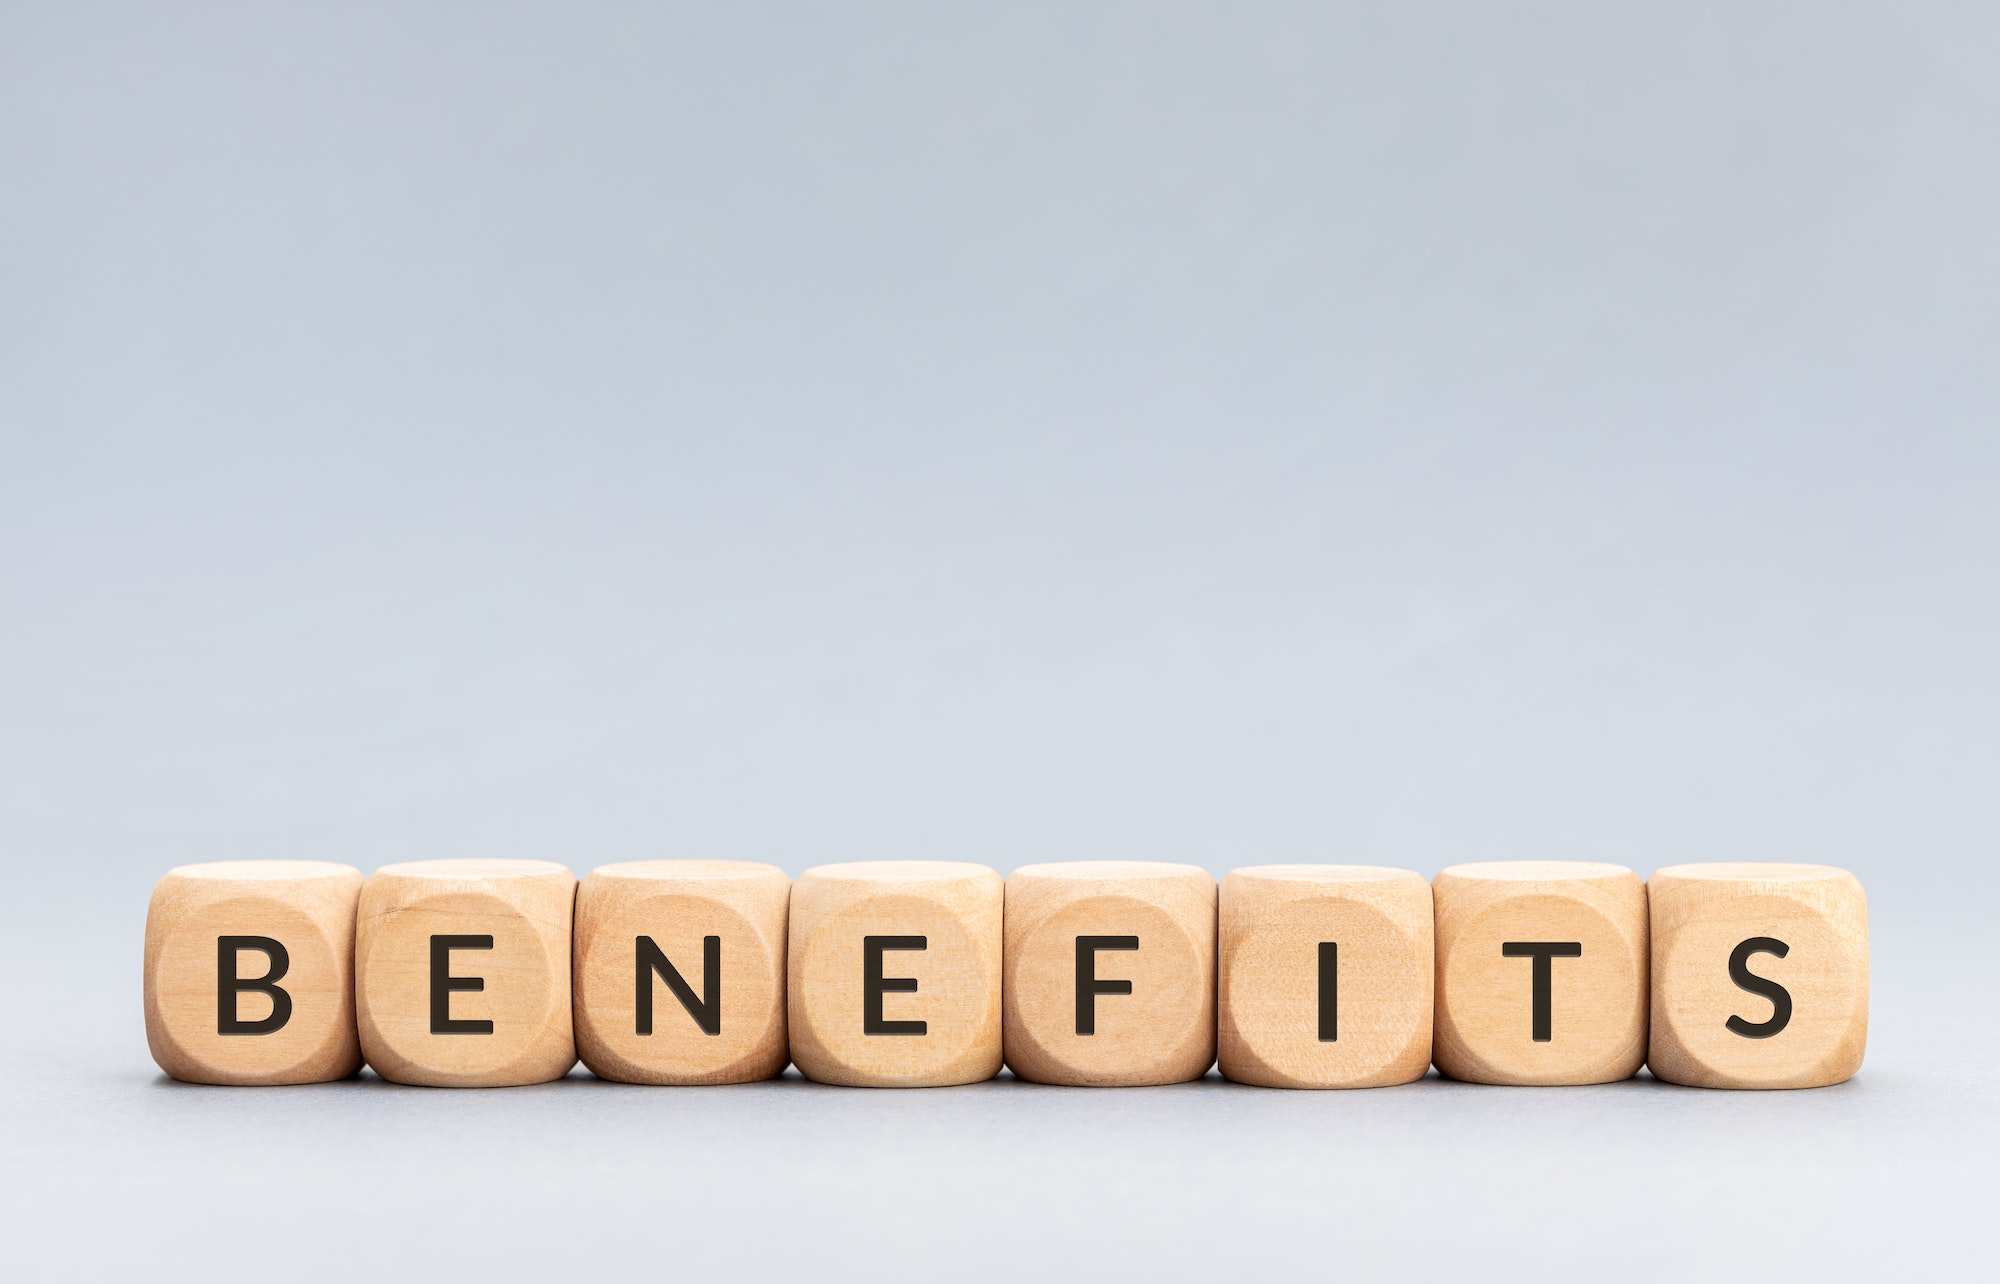 Benefits word on wooden blocks on gray background